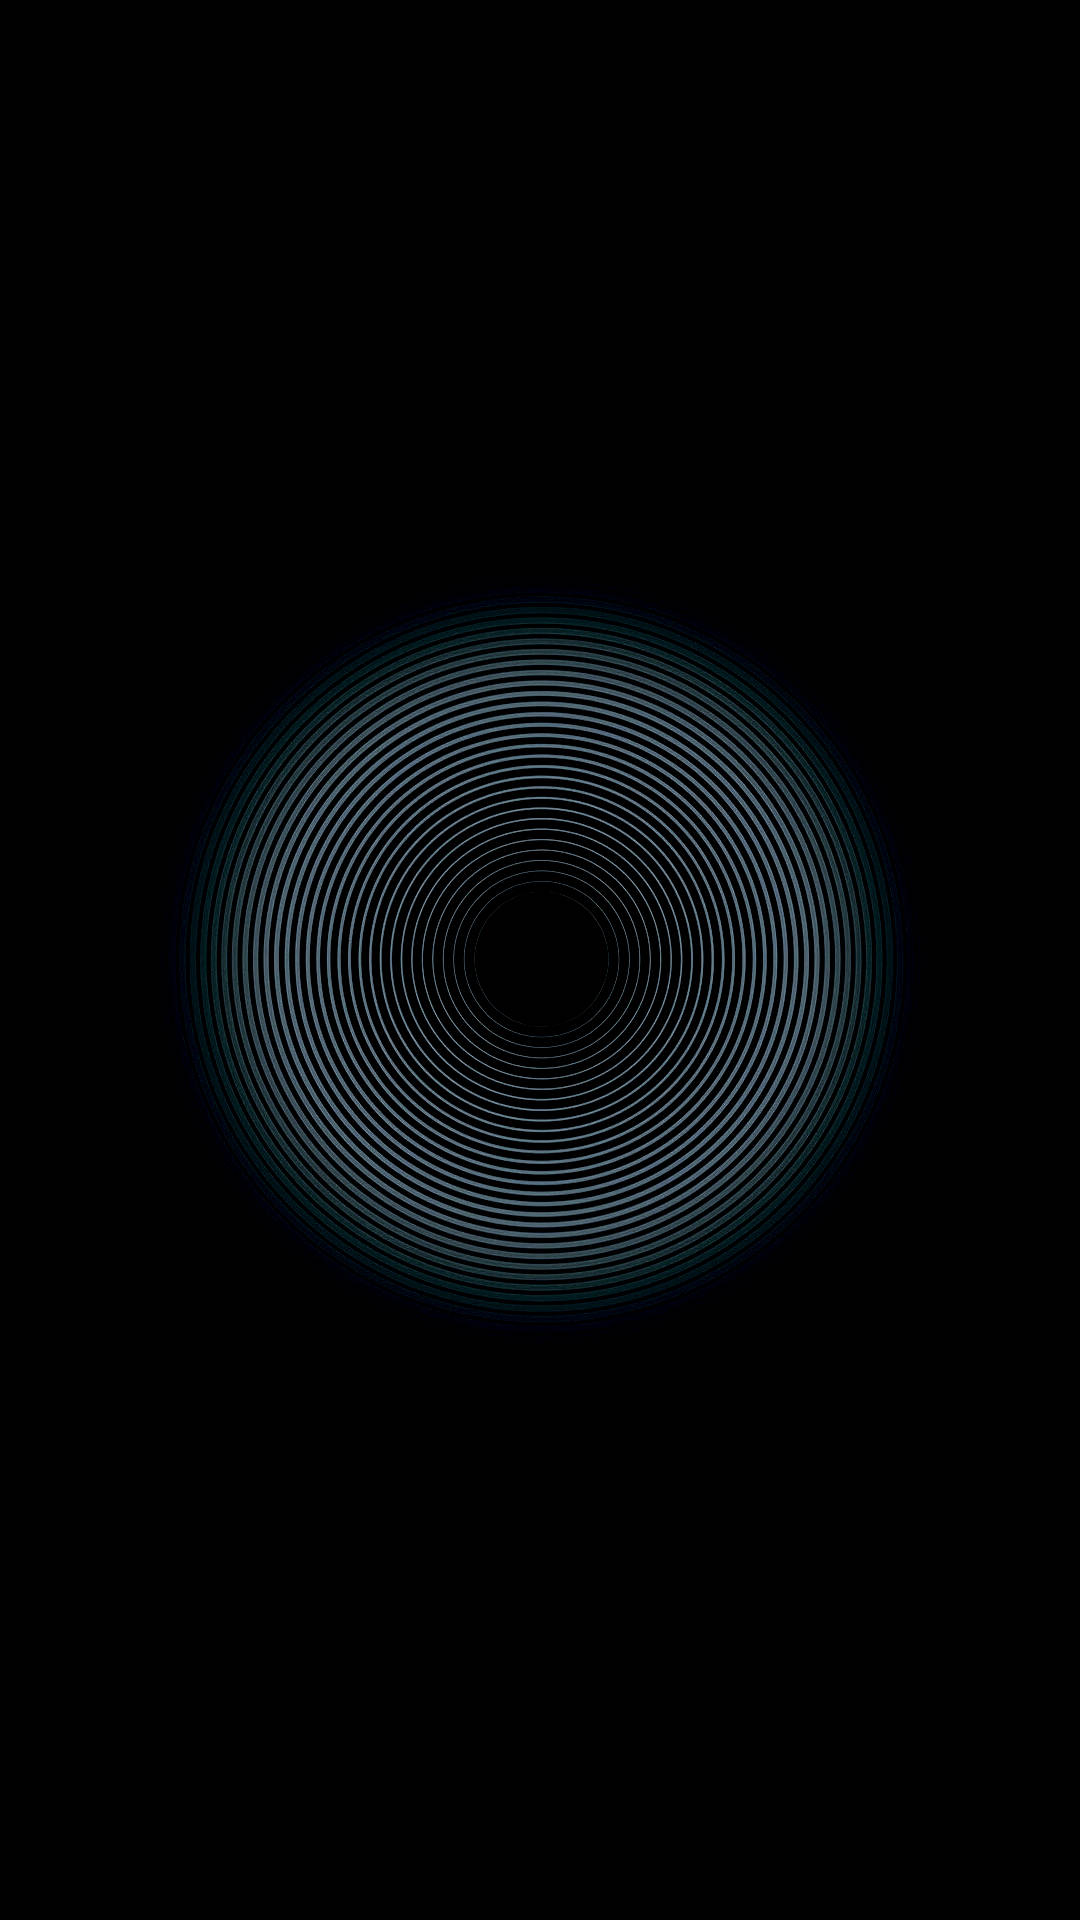 Intricate Super Amoled Ripples Luminescent Display Background